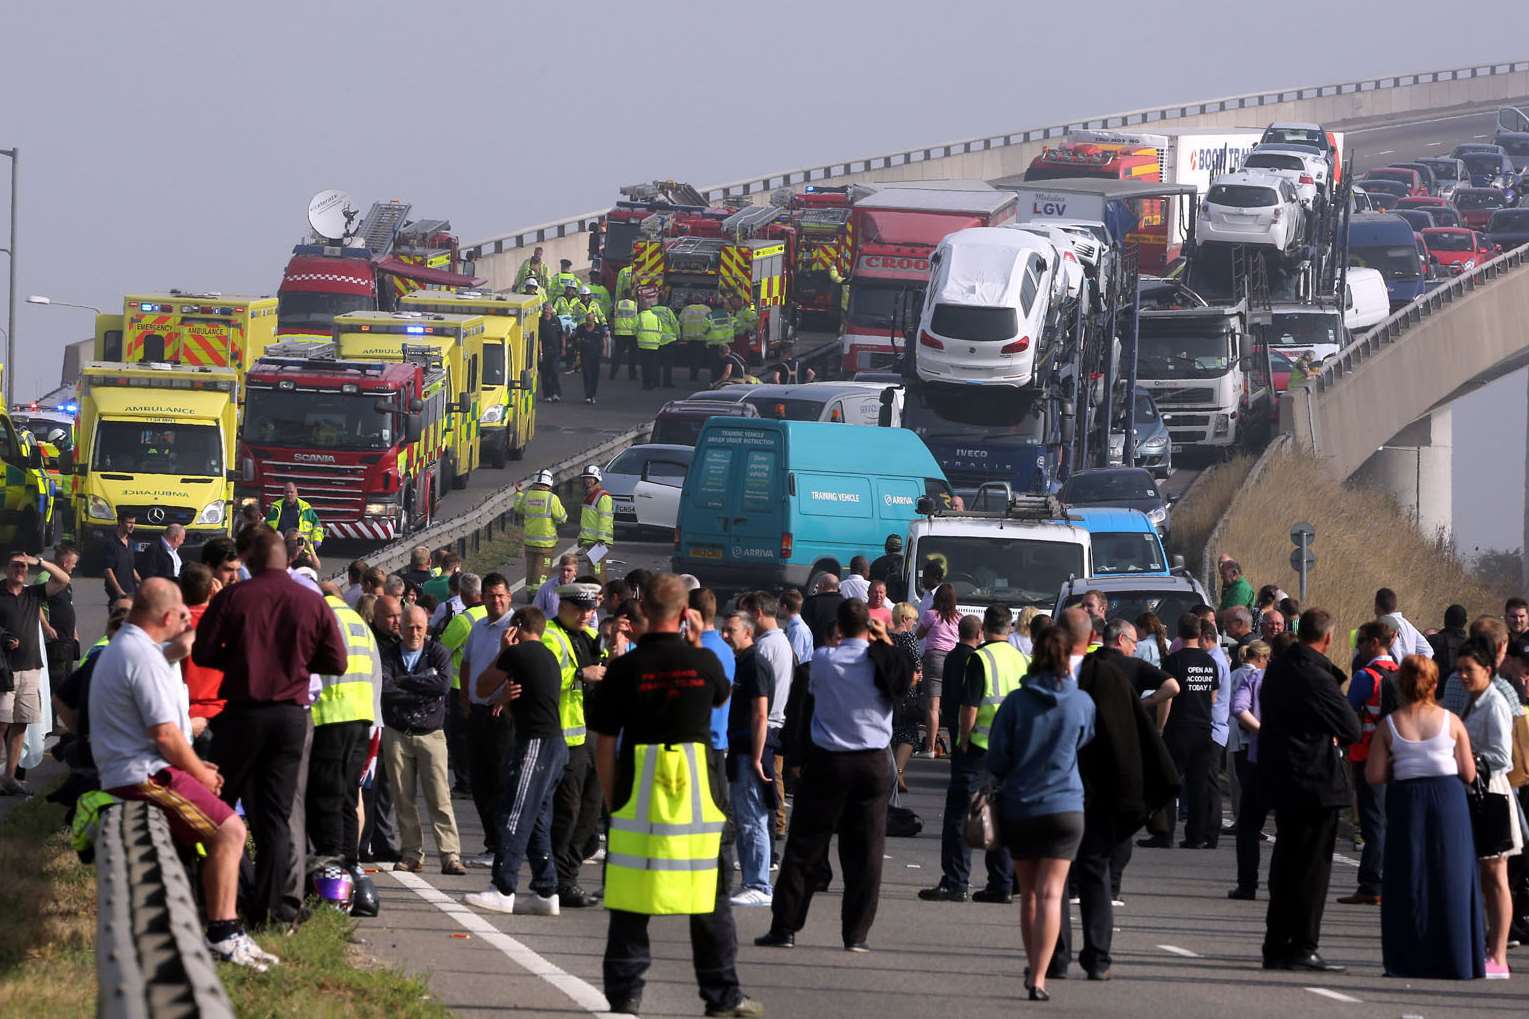 The scene of the massive crash on Sheppey Crossing. Picture: Chris Davey